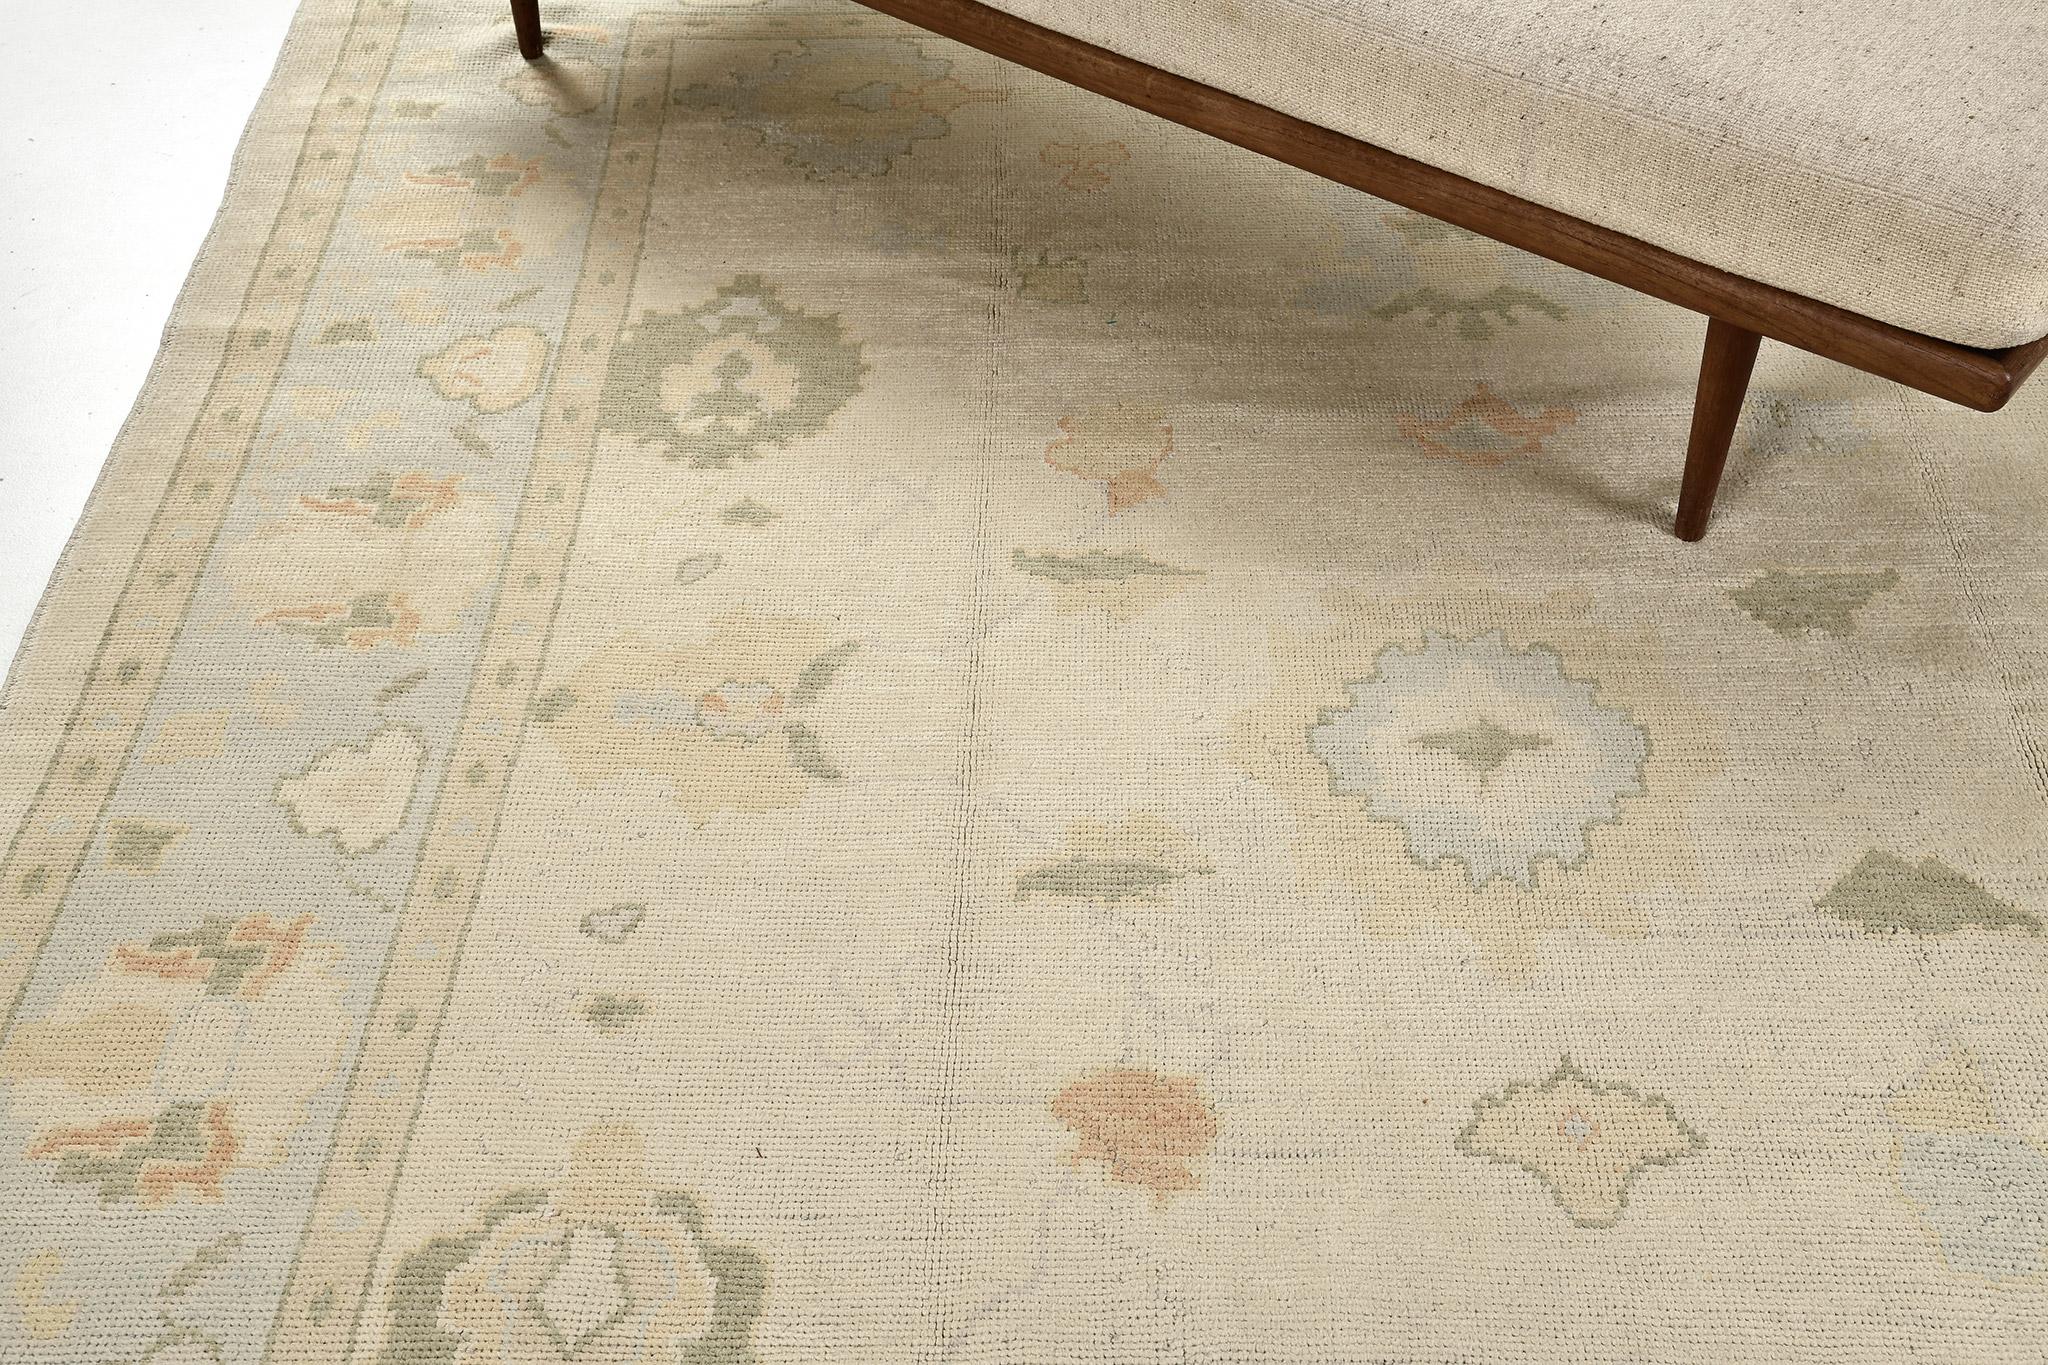 A phenomenal Oushak design revival rug that has a Classic and timeless pattern. Featuring the collaboration of muted tones sky blue and ivory, this classy rug is composed with enchanting graceful palmettes and florid elements that create a